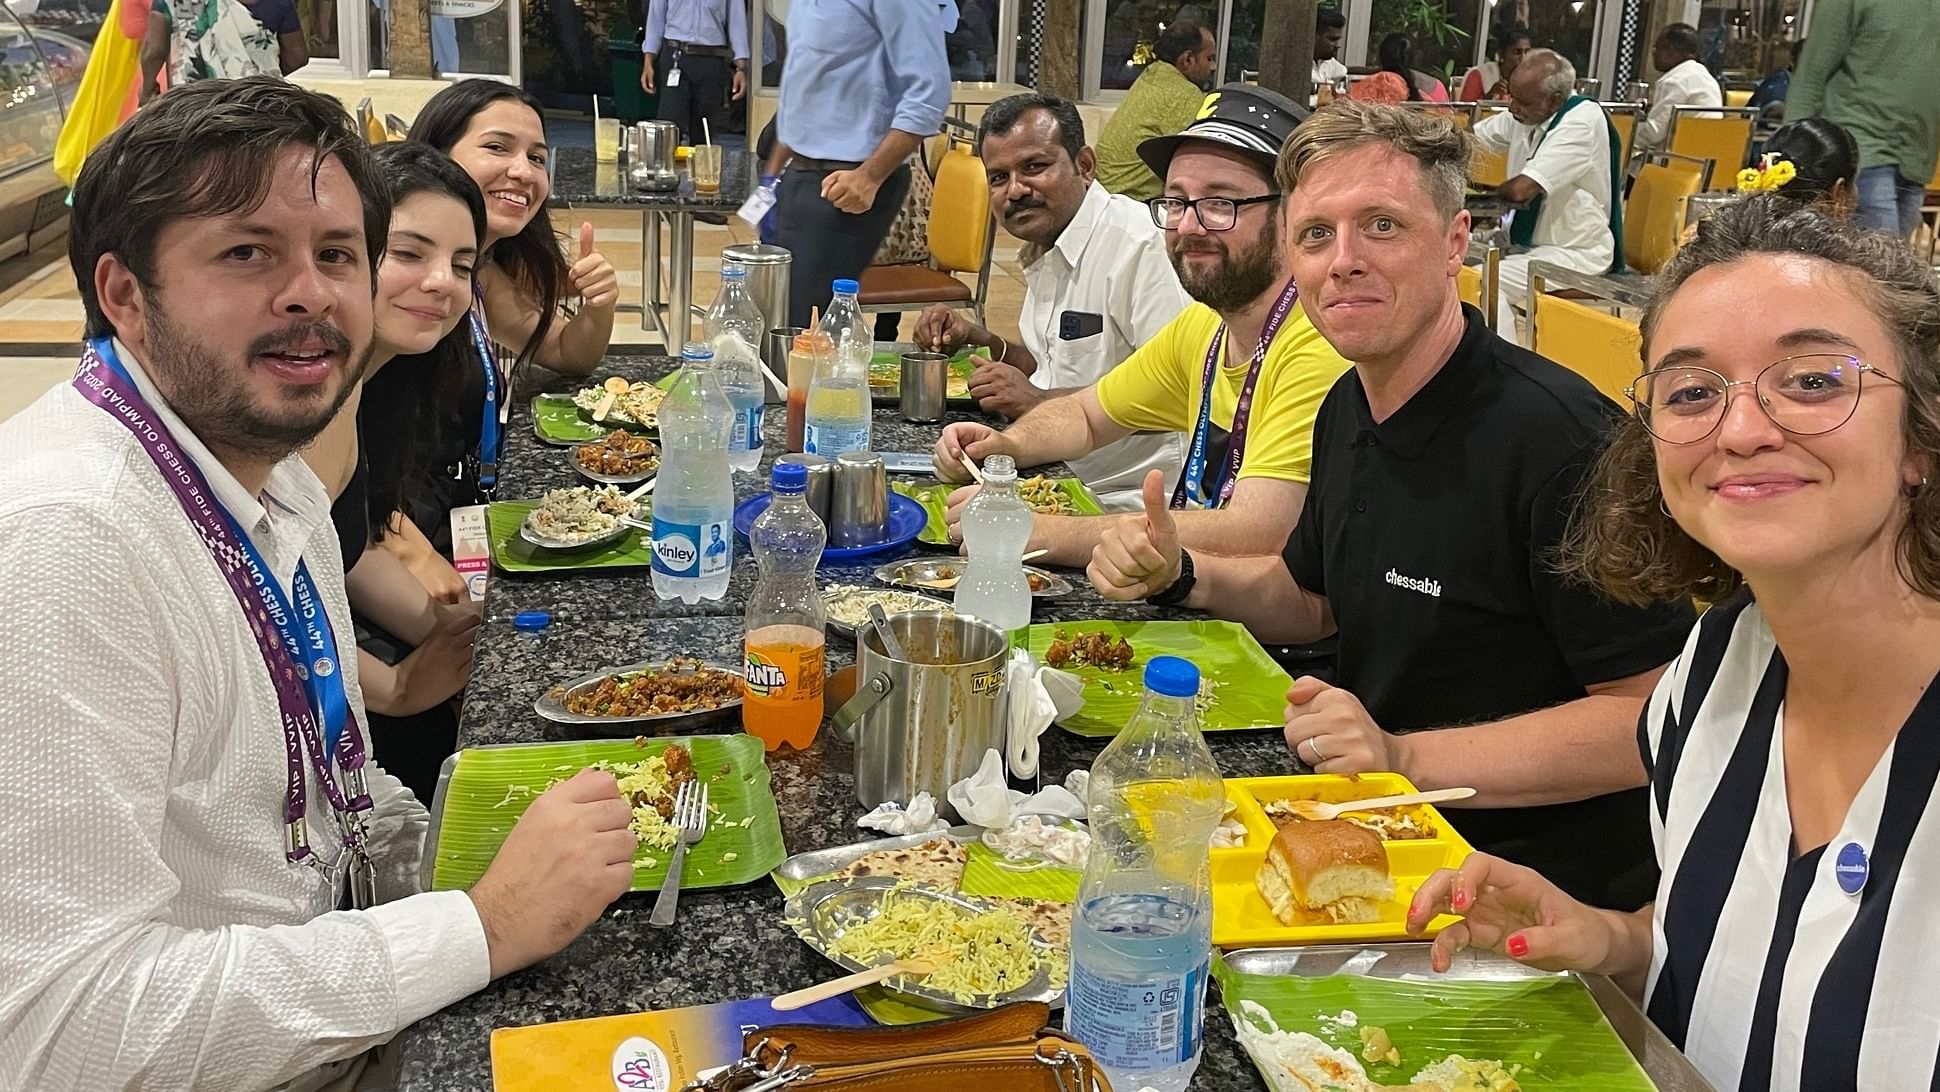 Chessable CEO Geert van der Velde's tweet 'Loved the food so much I went back and brought the whole team..' went viral and saw Prime Minister Narendra Modi sharing it. Credit: Twitter/@blackatlantic 